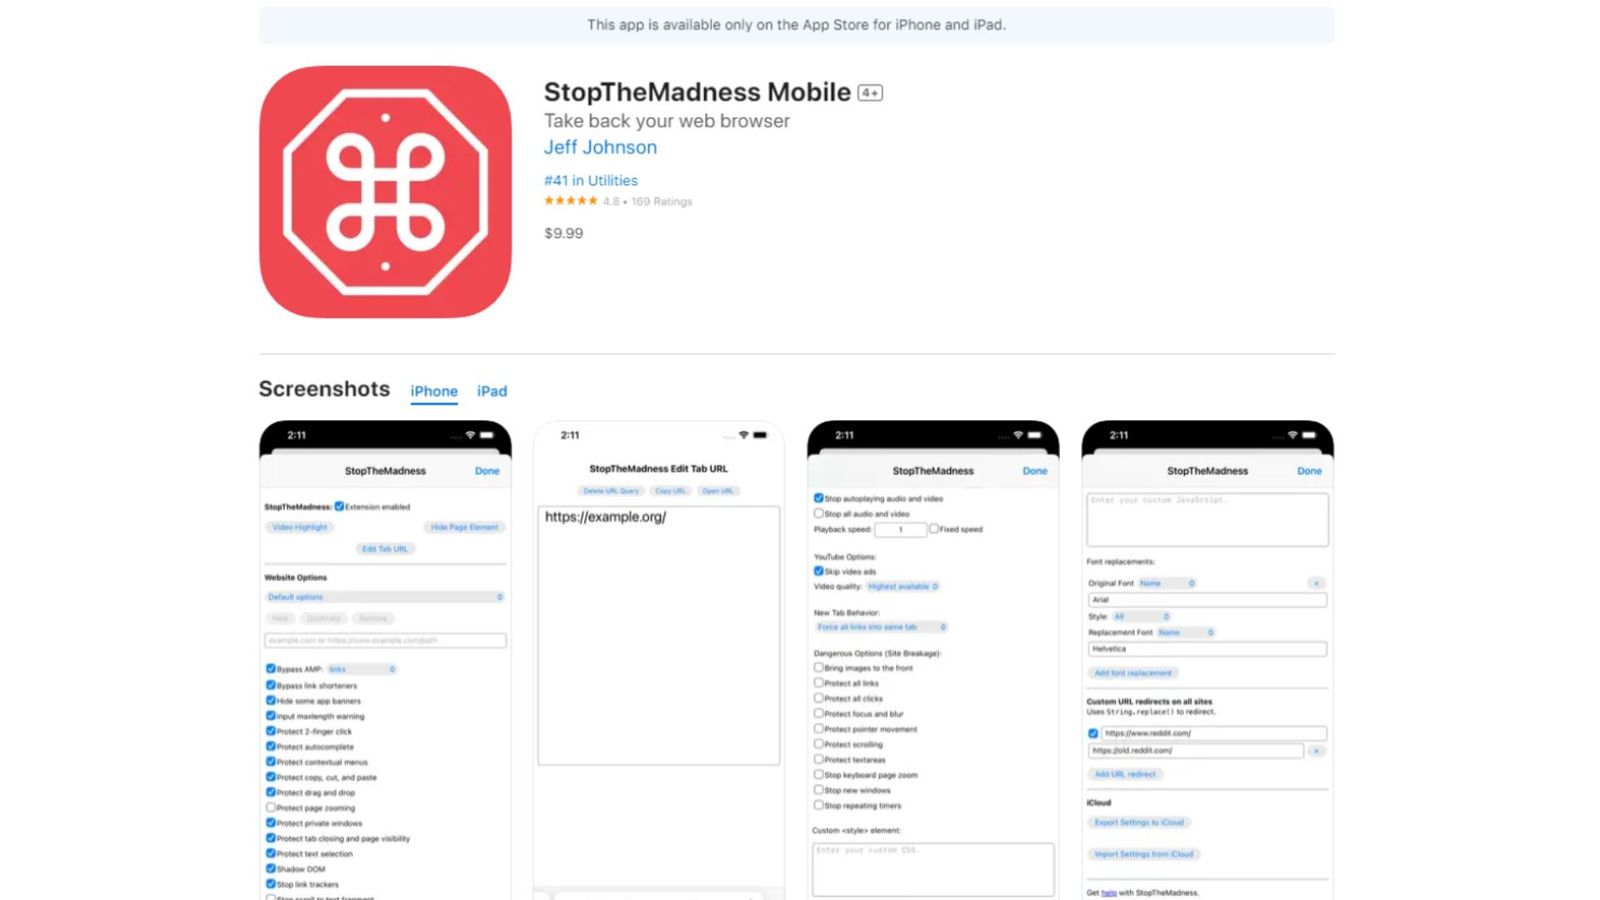 StopTheMadness Mobile